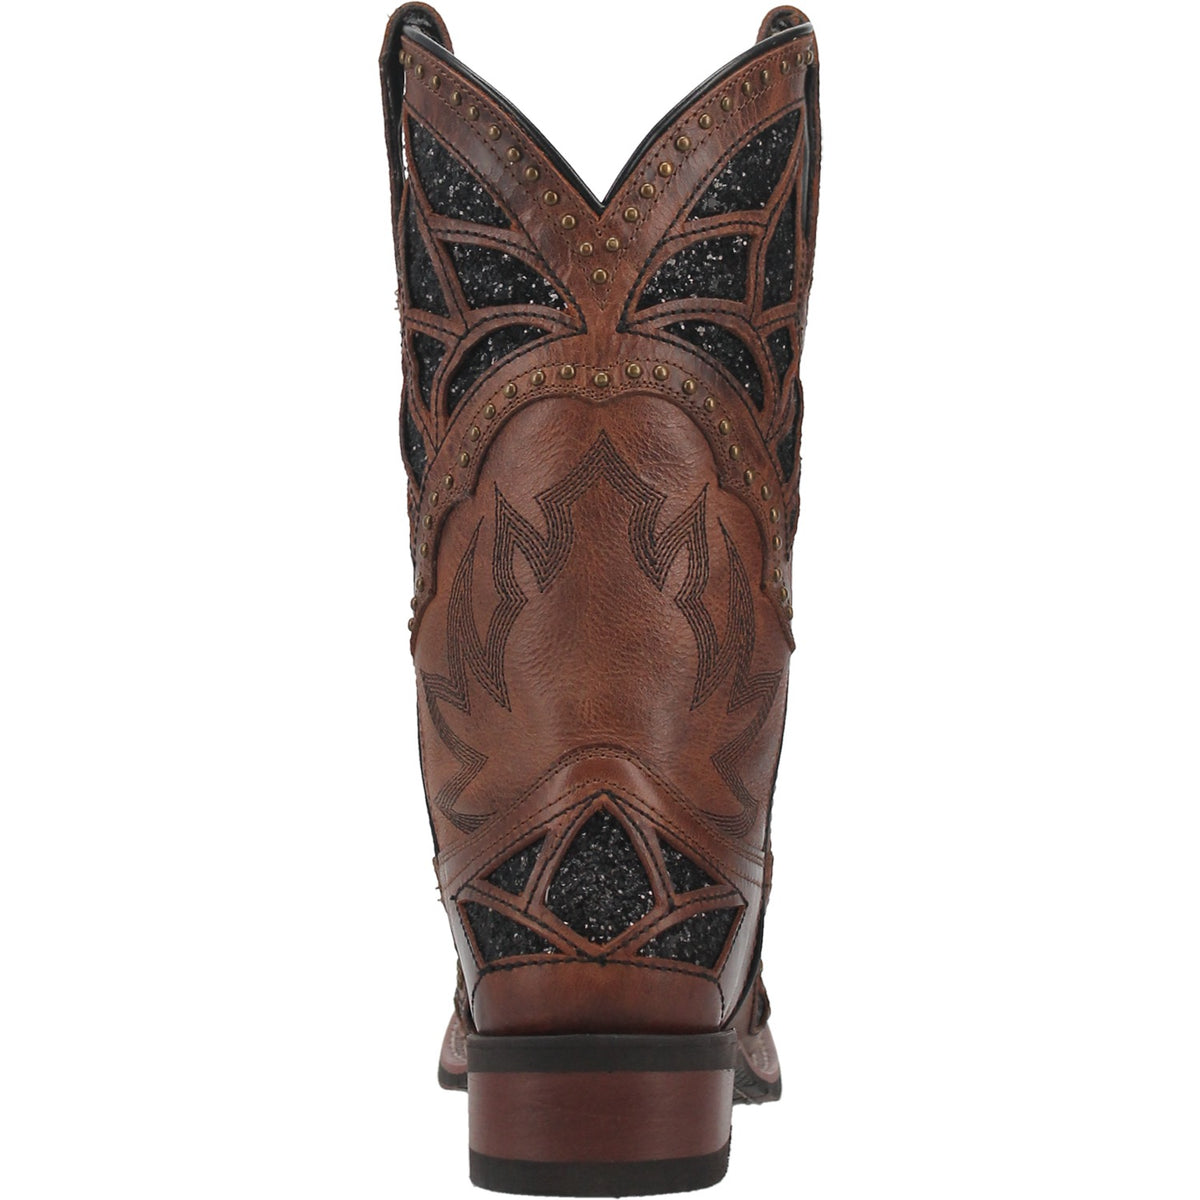 ETERNITY LEATHER BOOT Cover